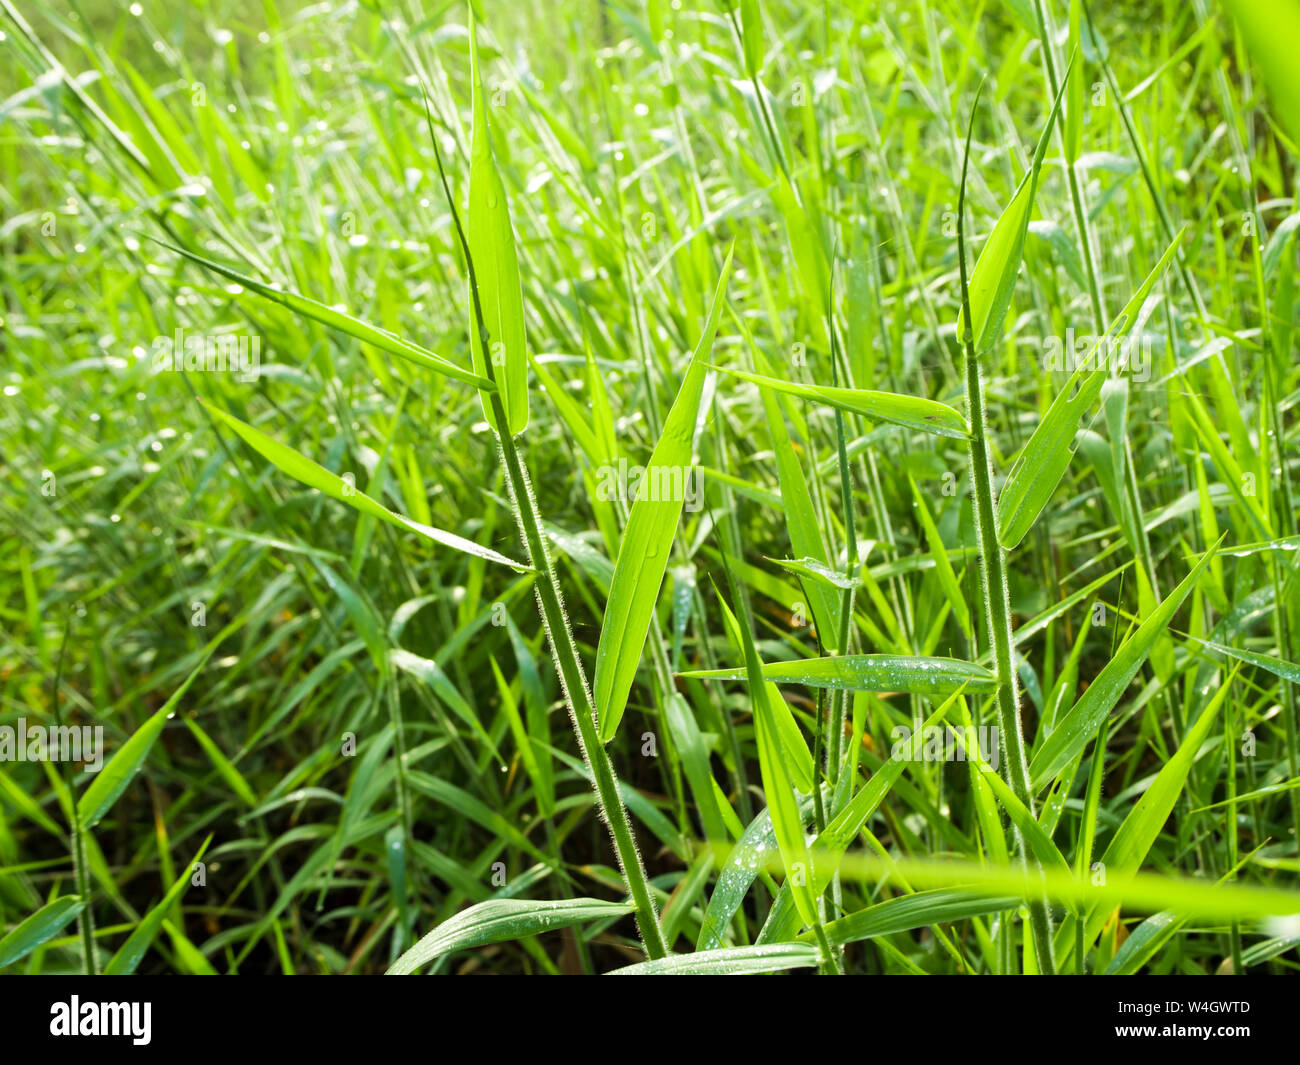 Freshness 'Para Grass' in the countryside grassland Stock Photo